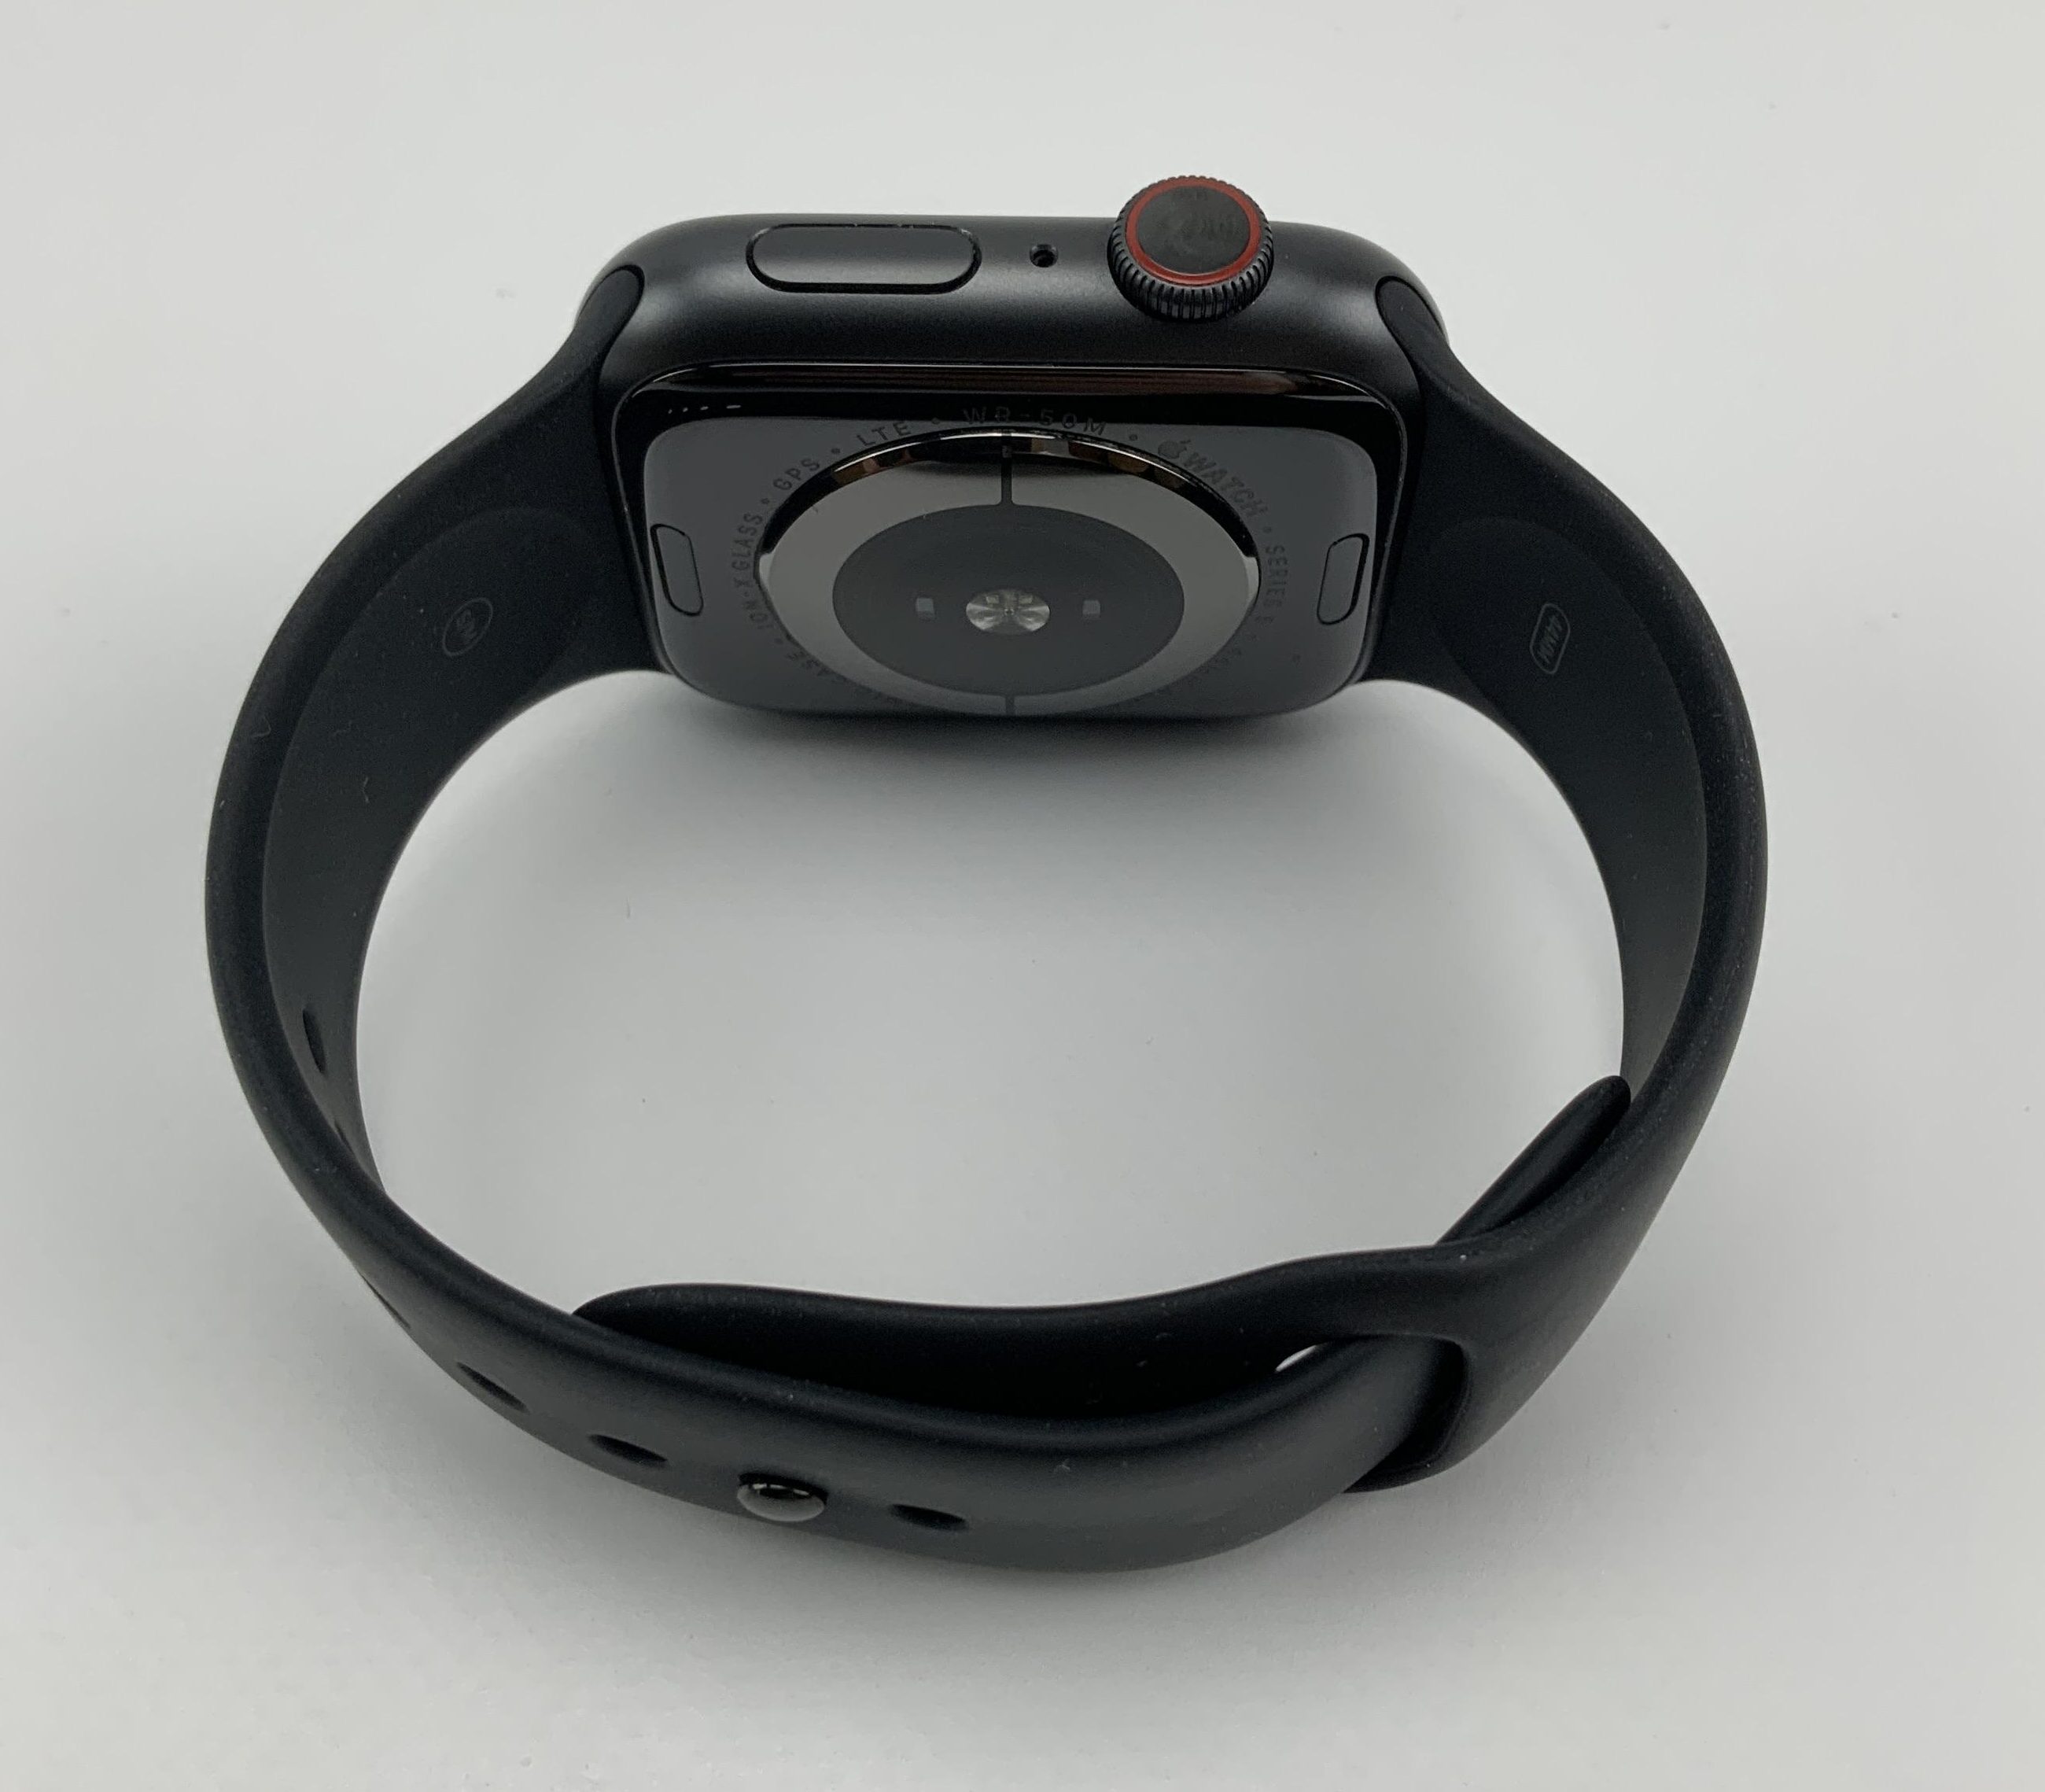 Watch Series 5 Aluminum Cellular (44mm), Space Gray, image 4